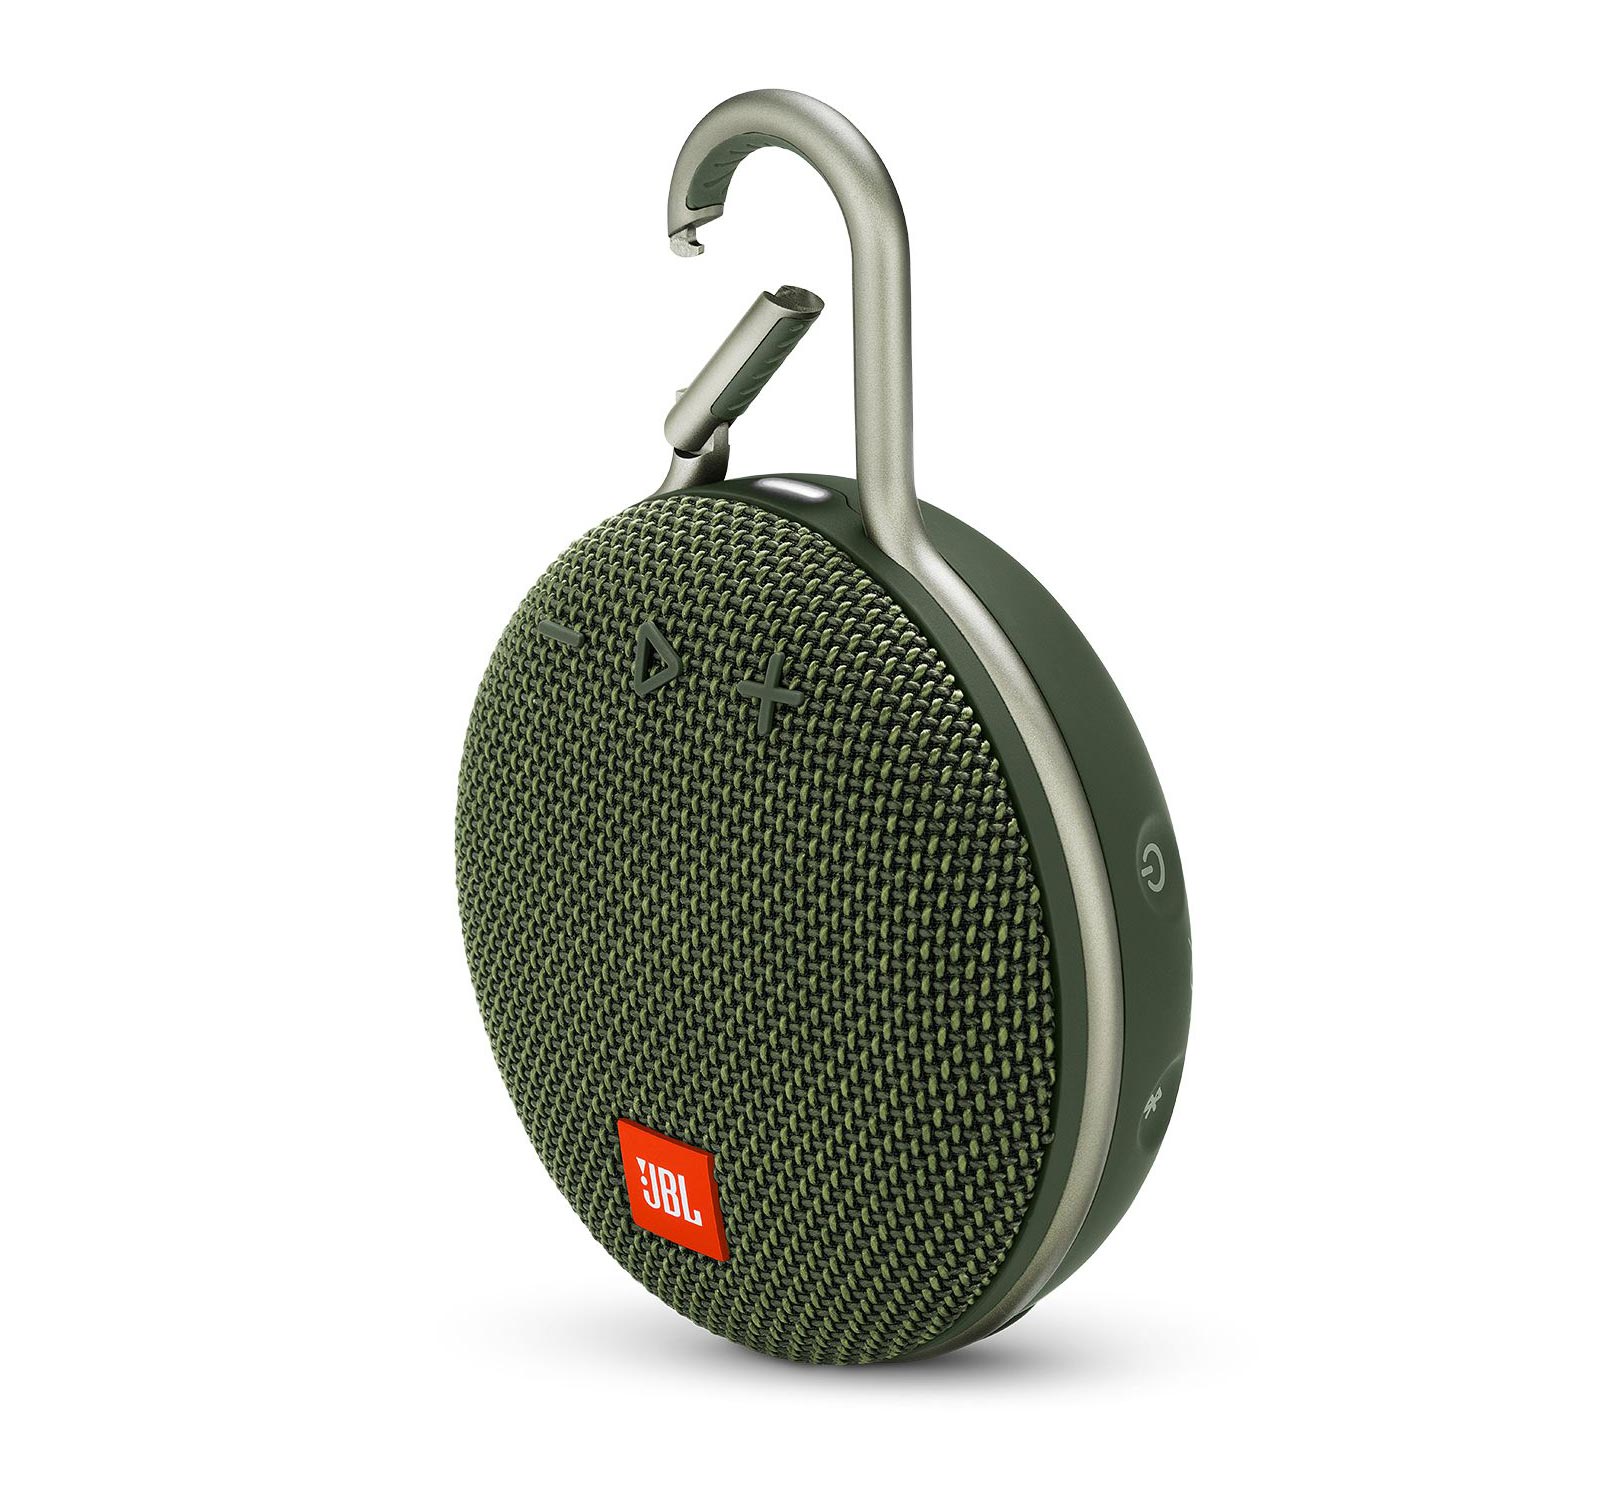 JBL Clip 3 Portable Bluetooth Speaker with Carabiner - Green - image 2 of 4